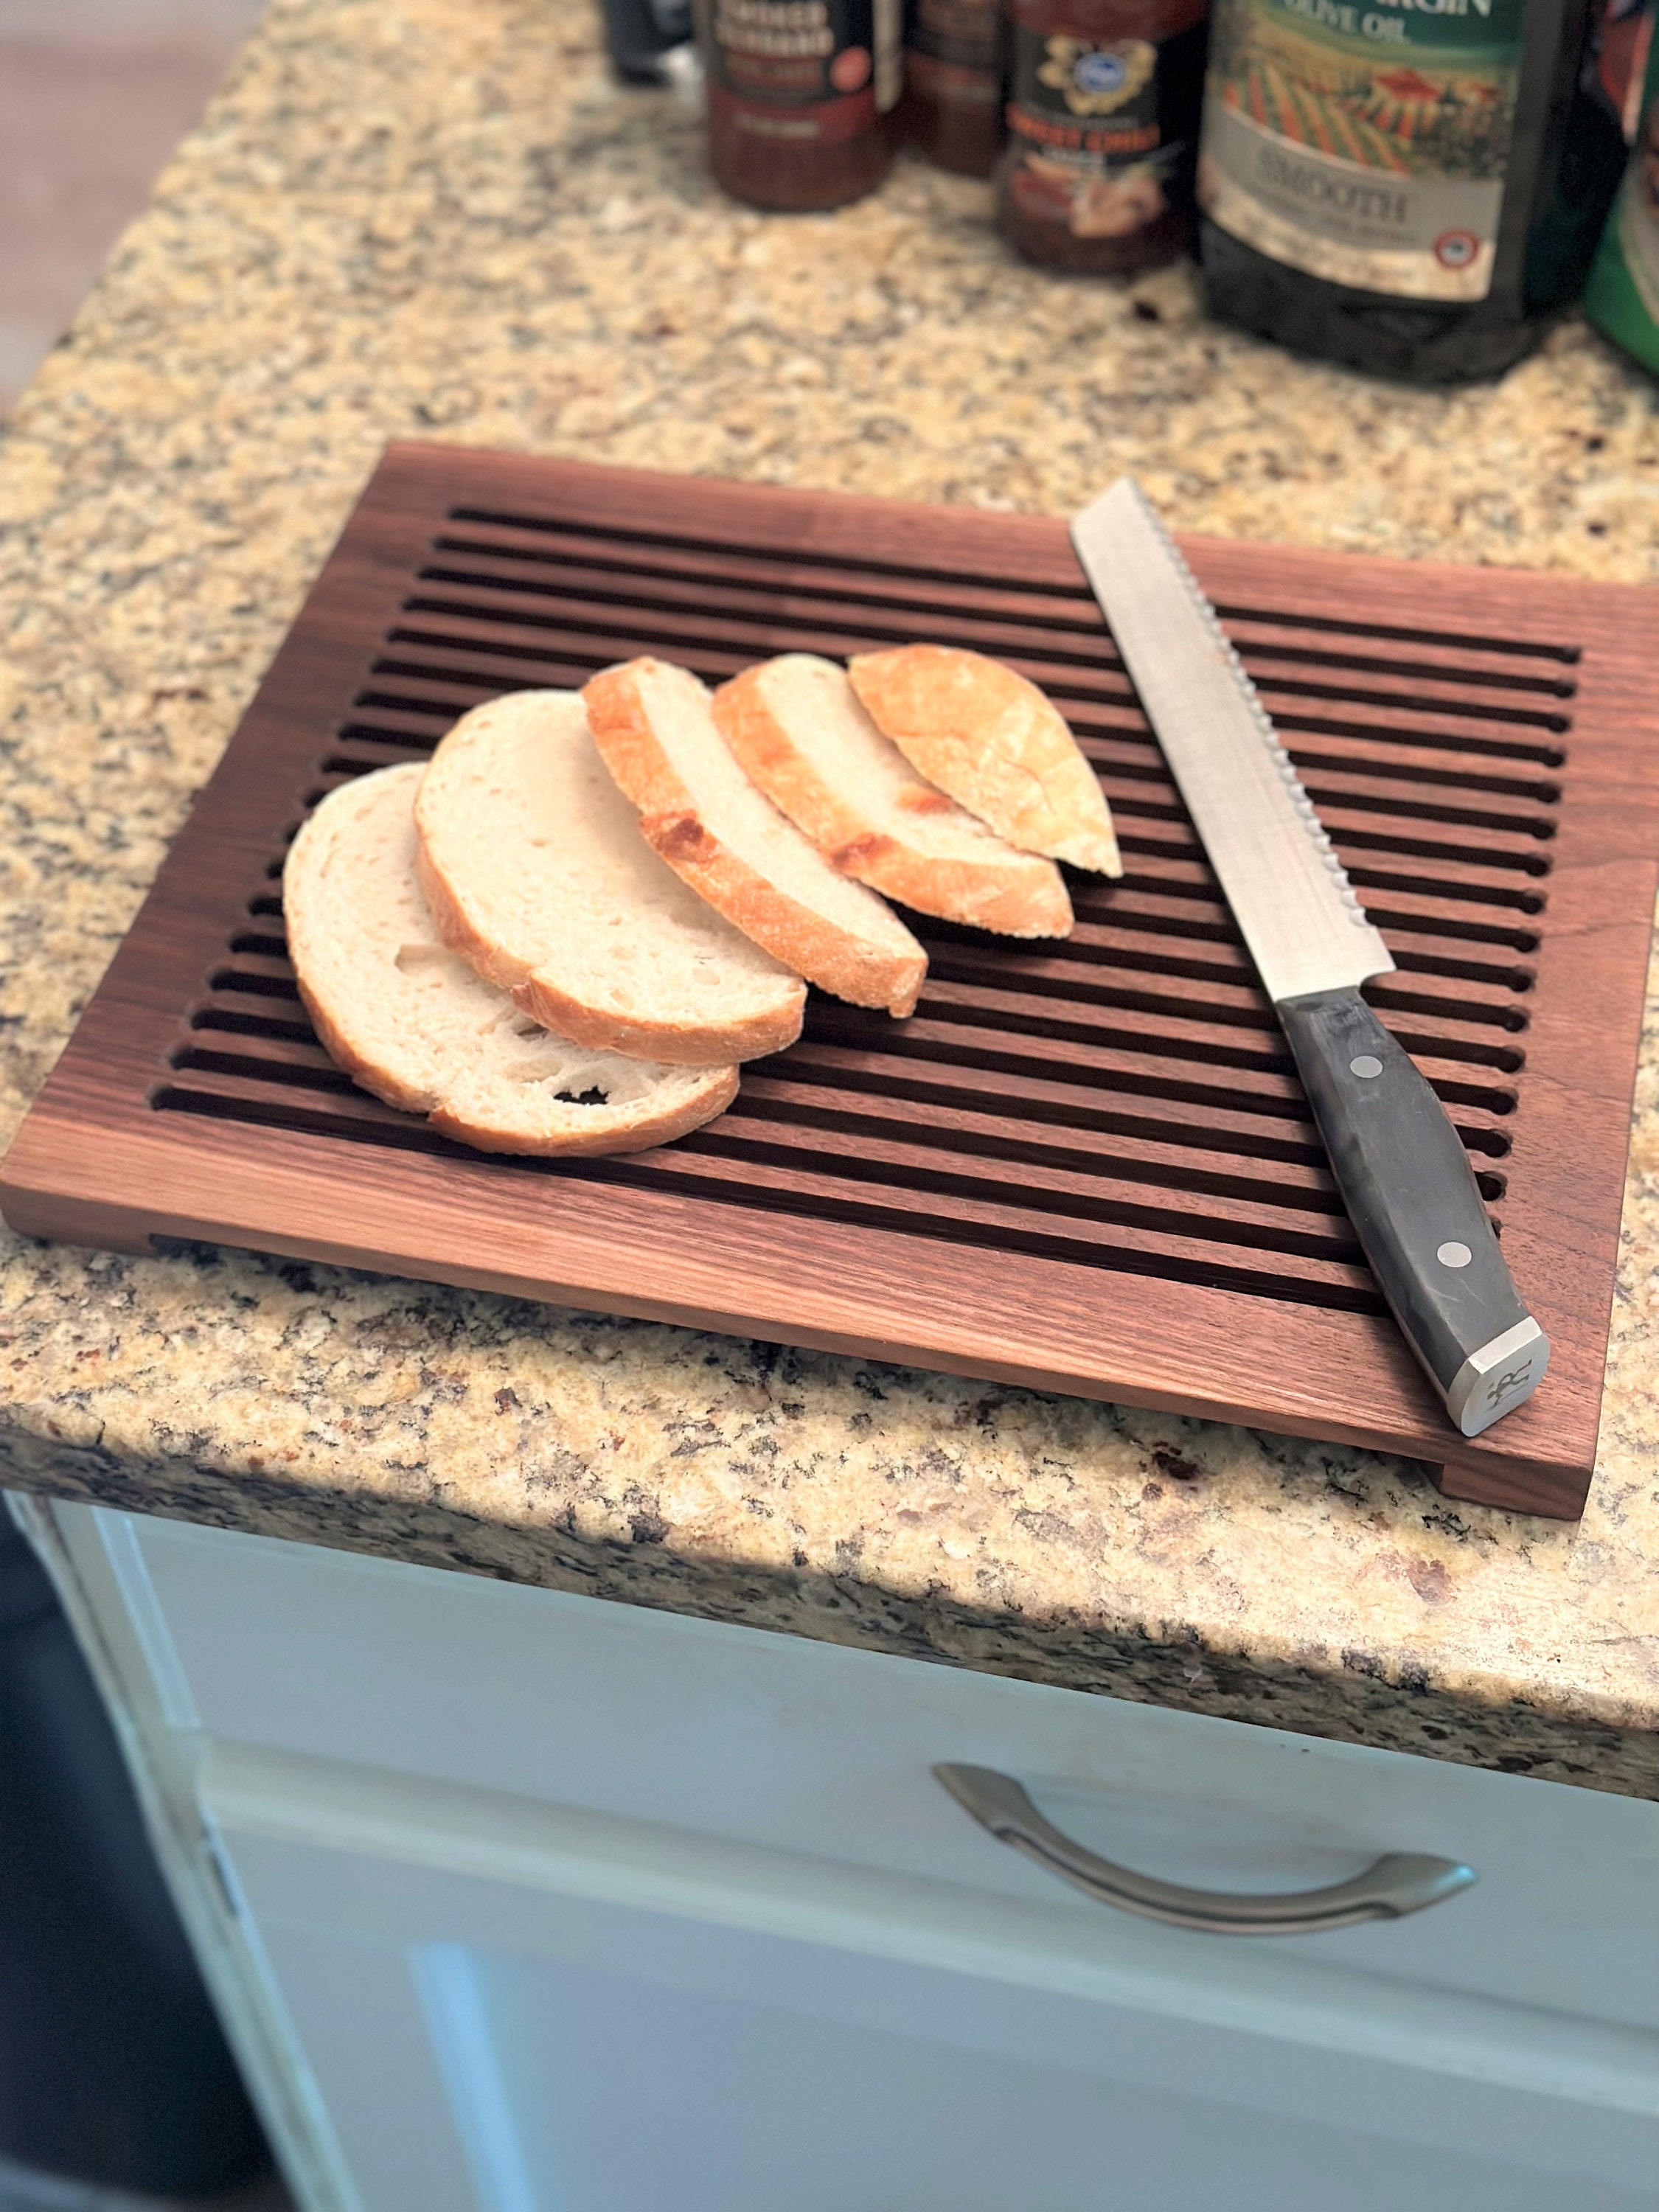  Sourdough Bread Bow Knife for Homemade Bread Cutter - Serrated  Bread Saw Slicer Wooden Knife - Baguette Cutter - Hand Crank Bread Slicer -  Texas Bread Knife - Right-Handed: Home & Kitchen